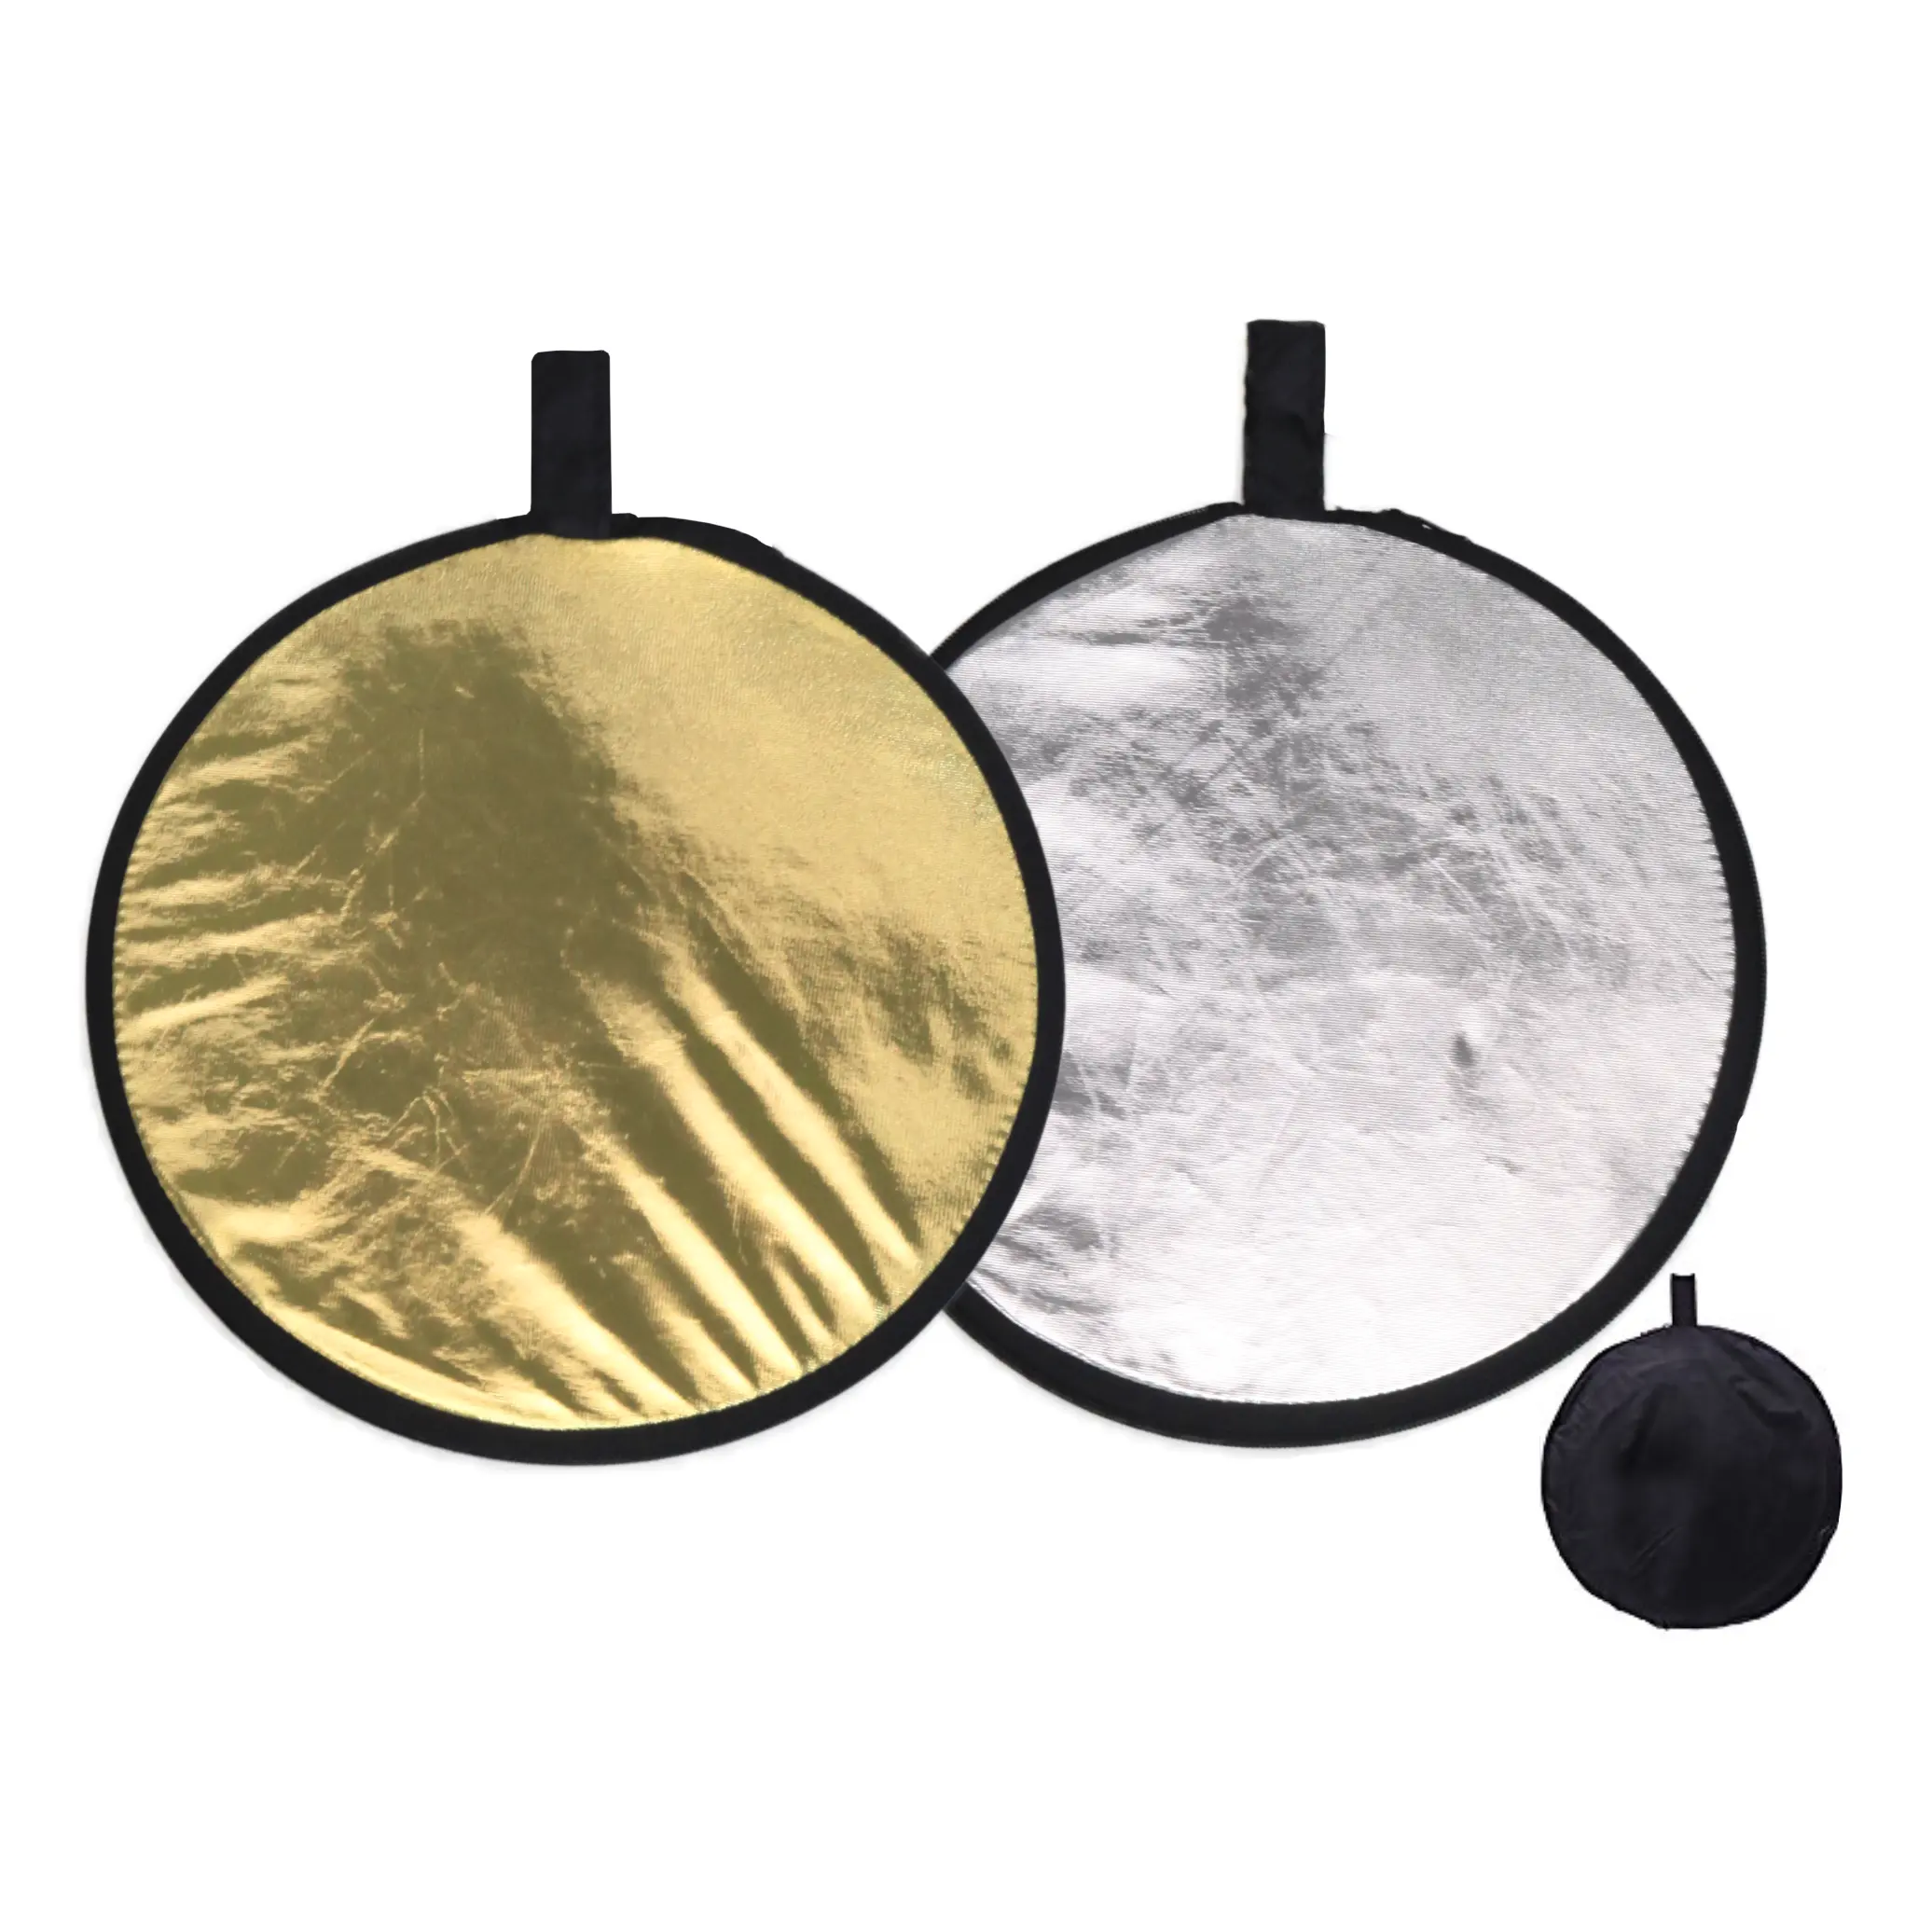 Silver Gold Photography Reflector 30cm 2 In 1 Collapsible Studio Photo Round Reflector Board Indoor Outdoor Lighting Diffuser